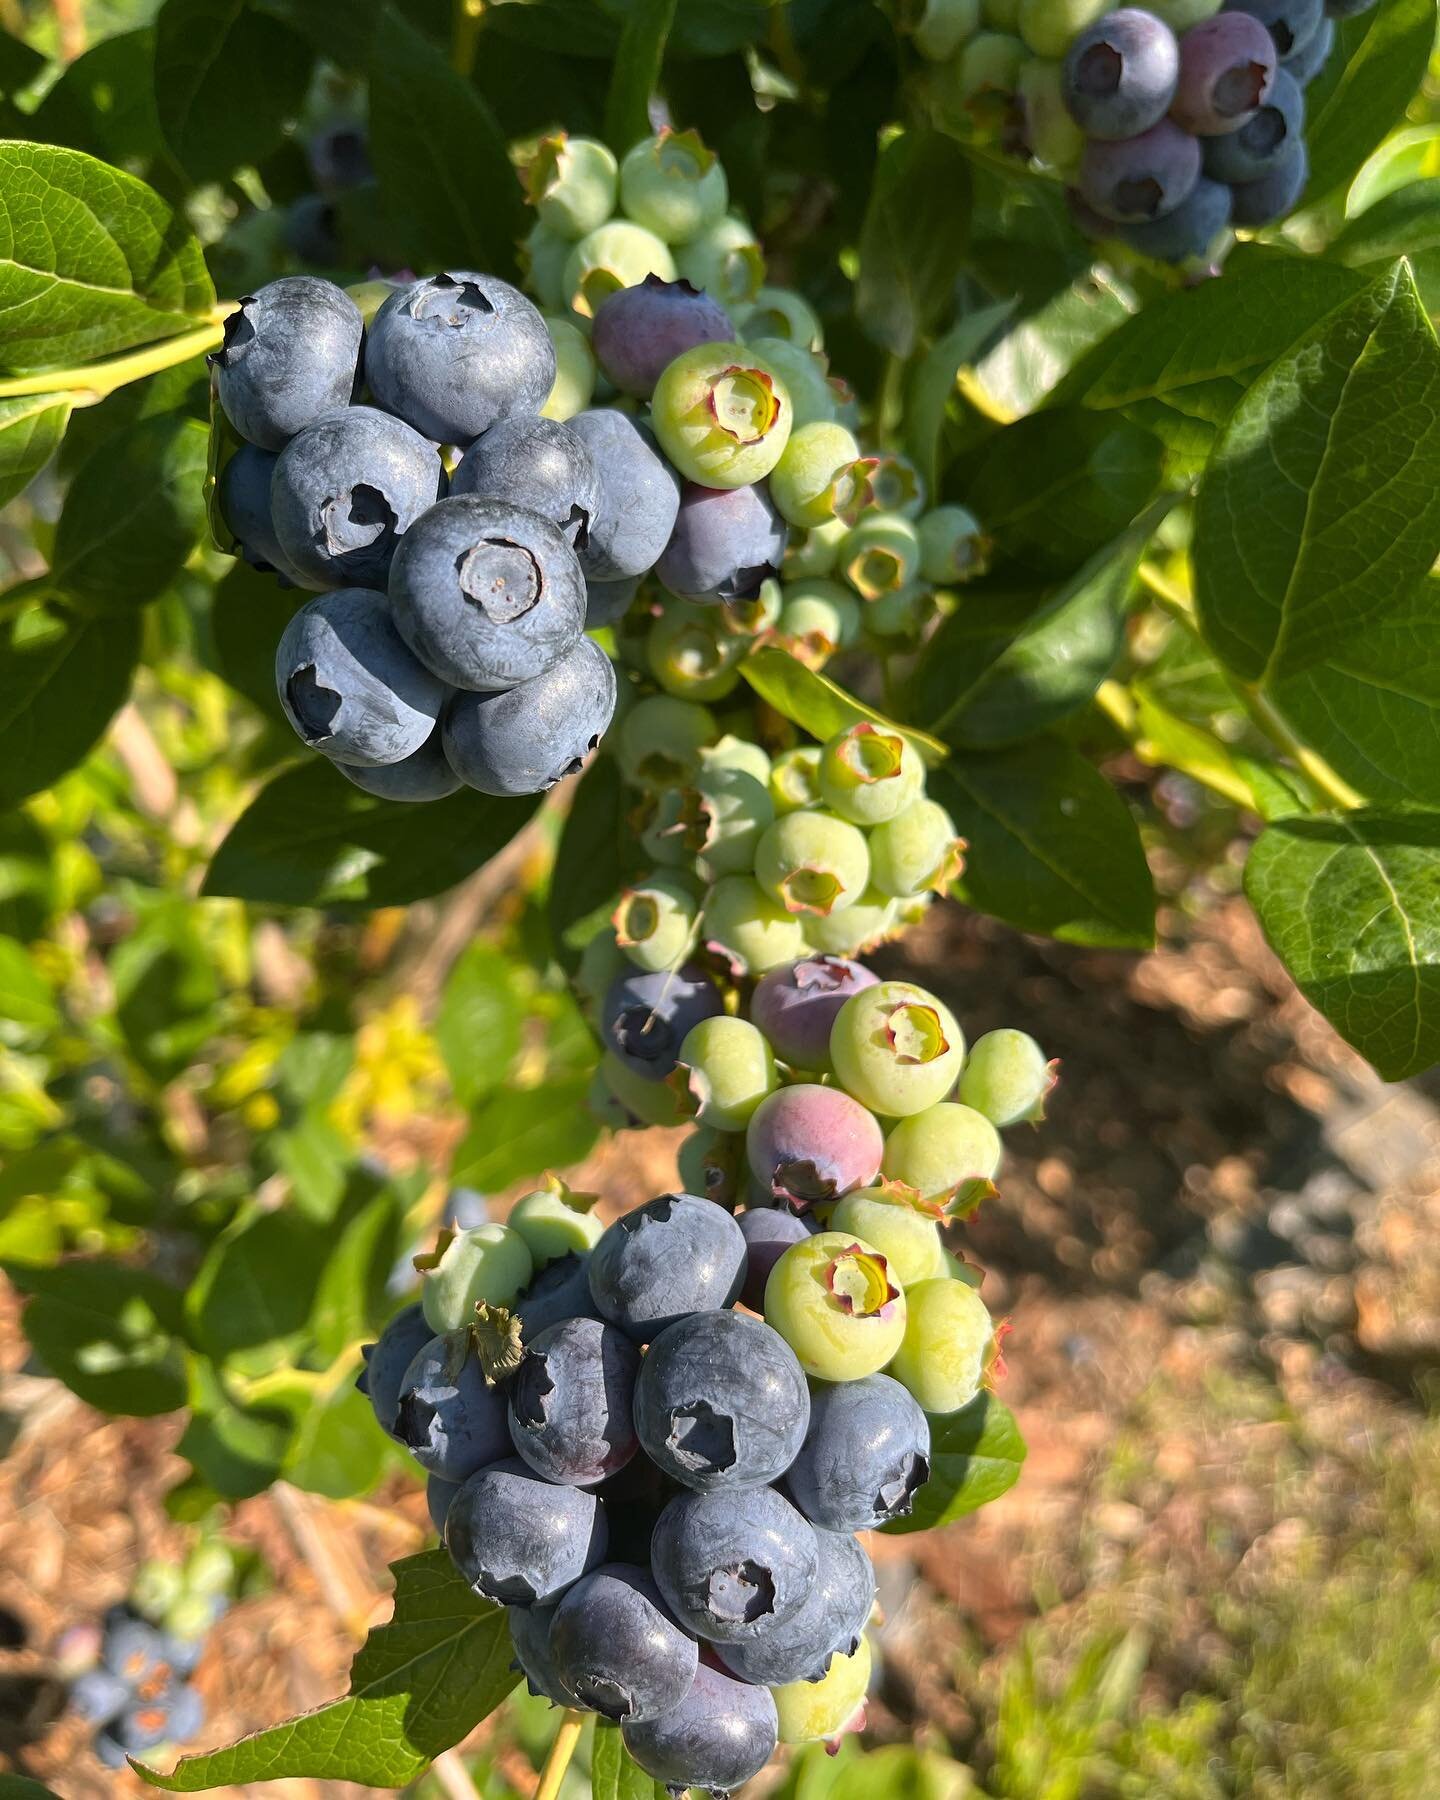 Bodacious berries coming soon!  #blueberry #loudounberries